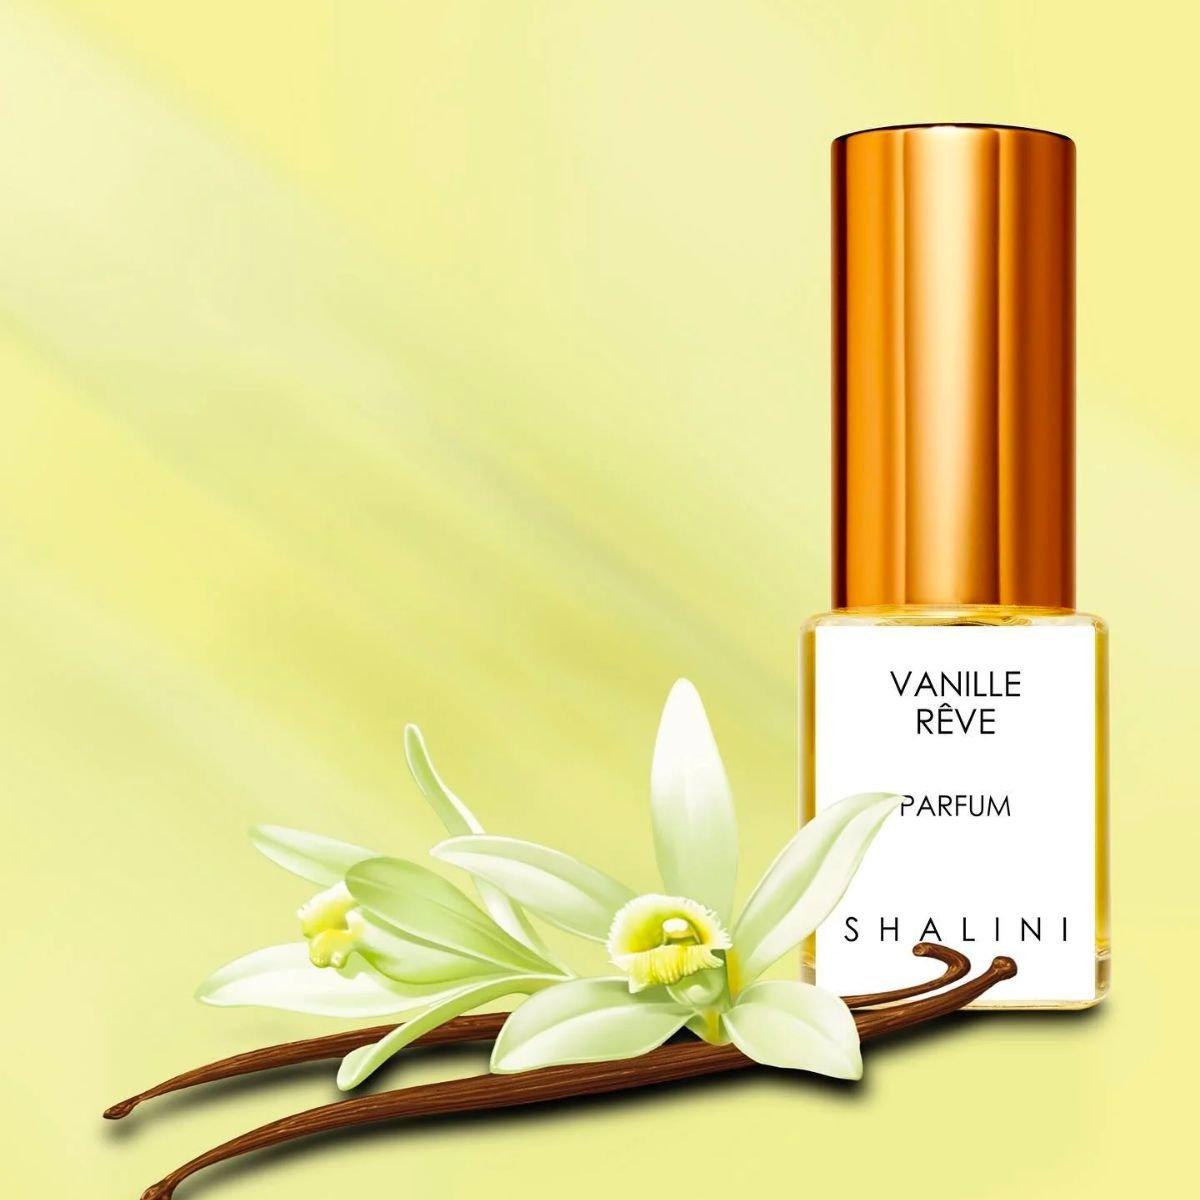 Image of Vanille Reve extrait by the perfume brand Shalini